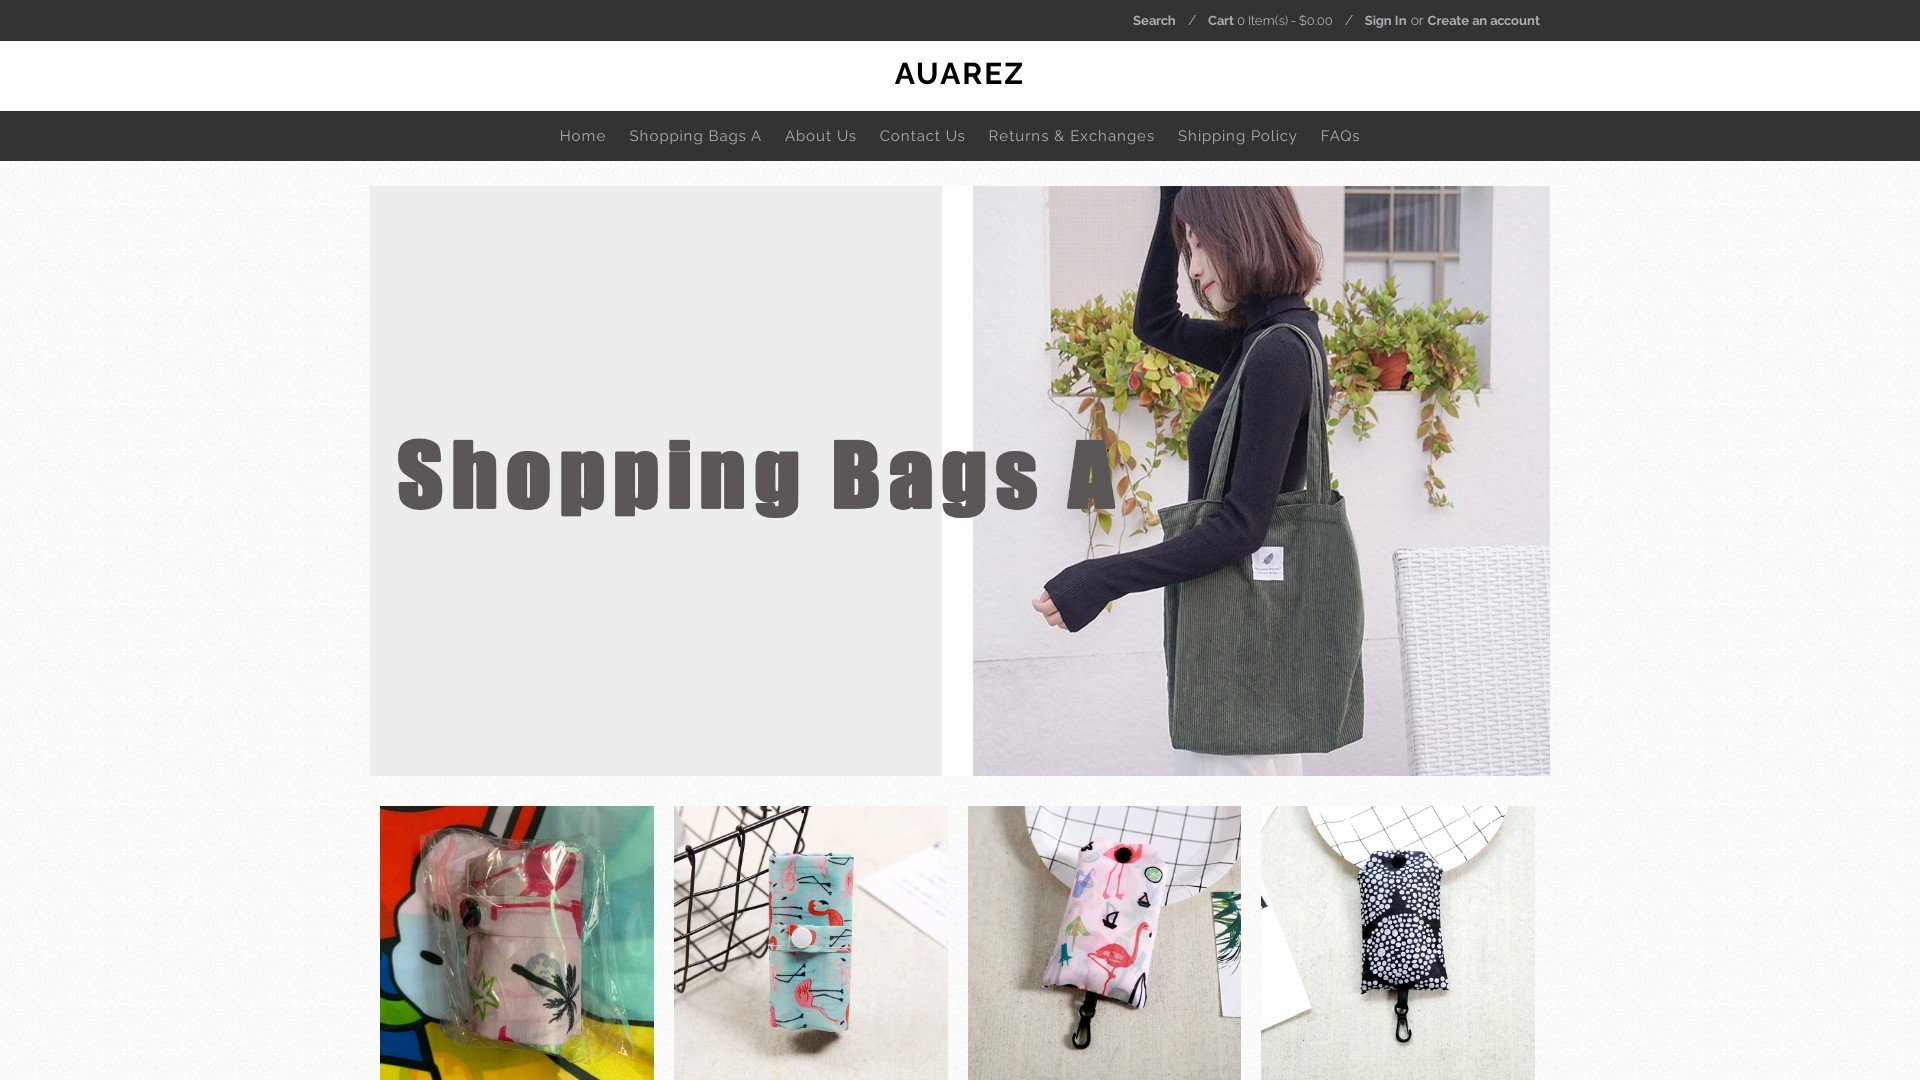 Is Auarez a Scam? Review of the Online Store